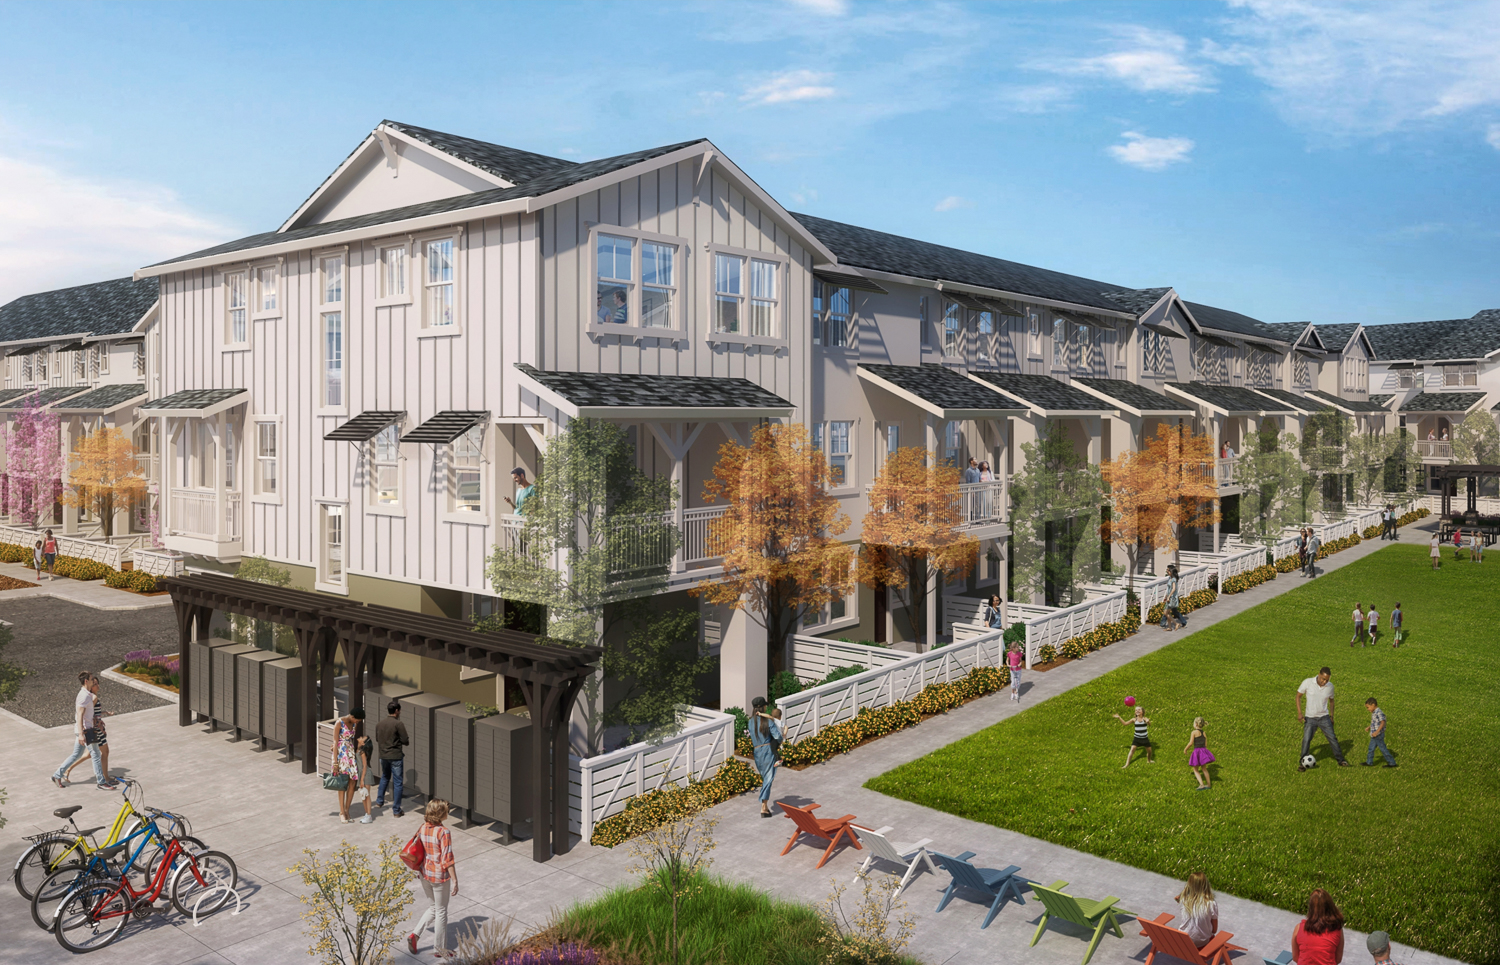 Oak Road 9-unit Townhomes overlooking the central open park, rendering by Robert Becker for SDG Architects